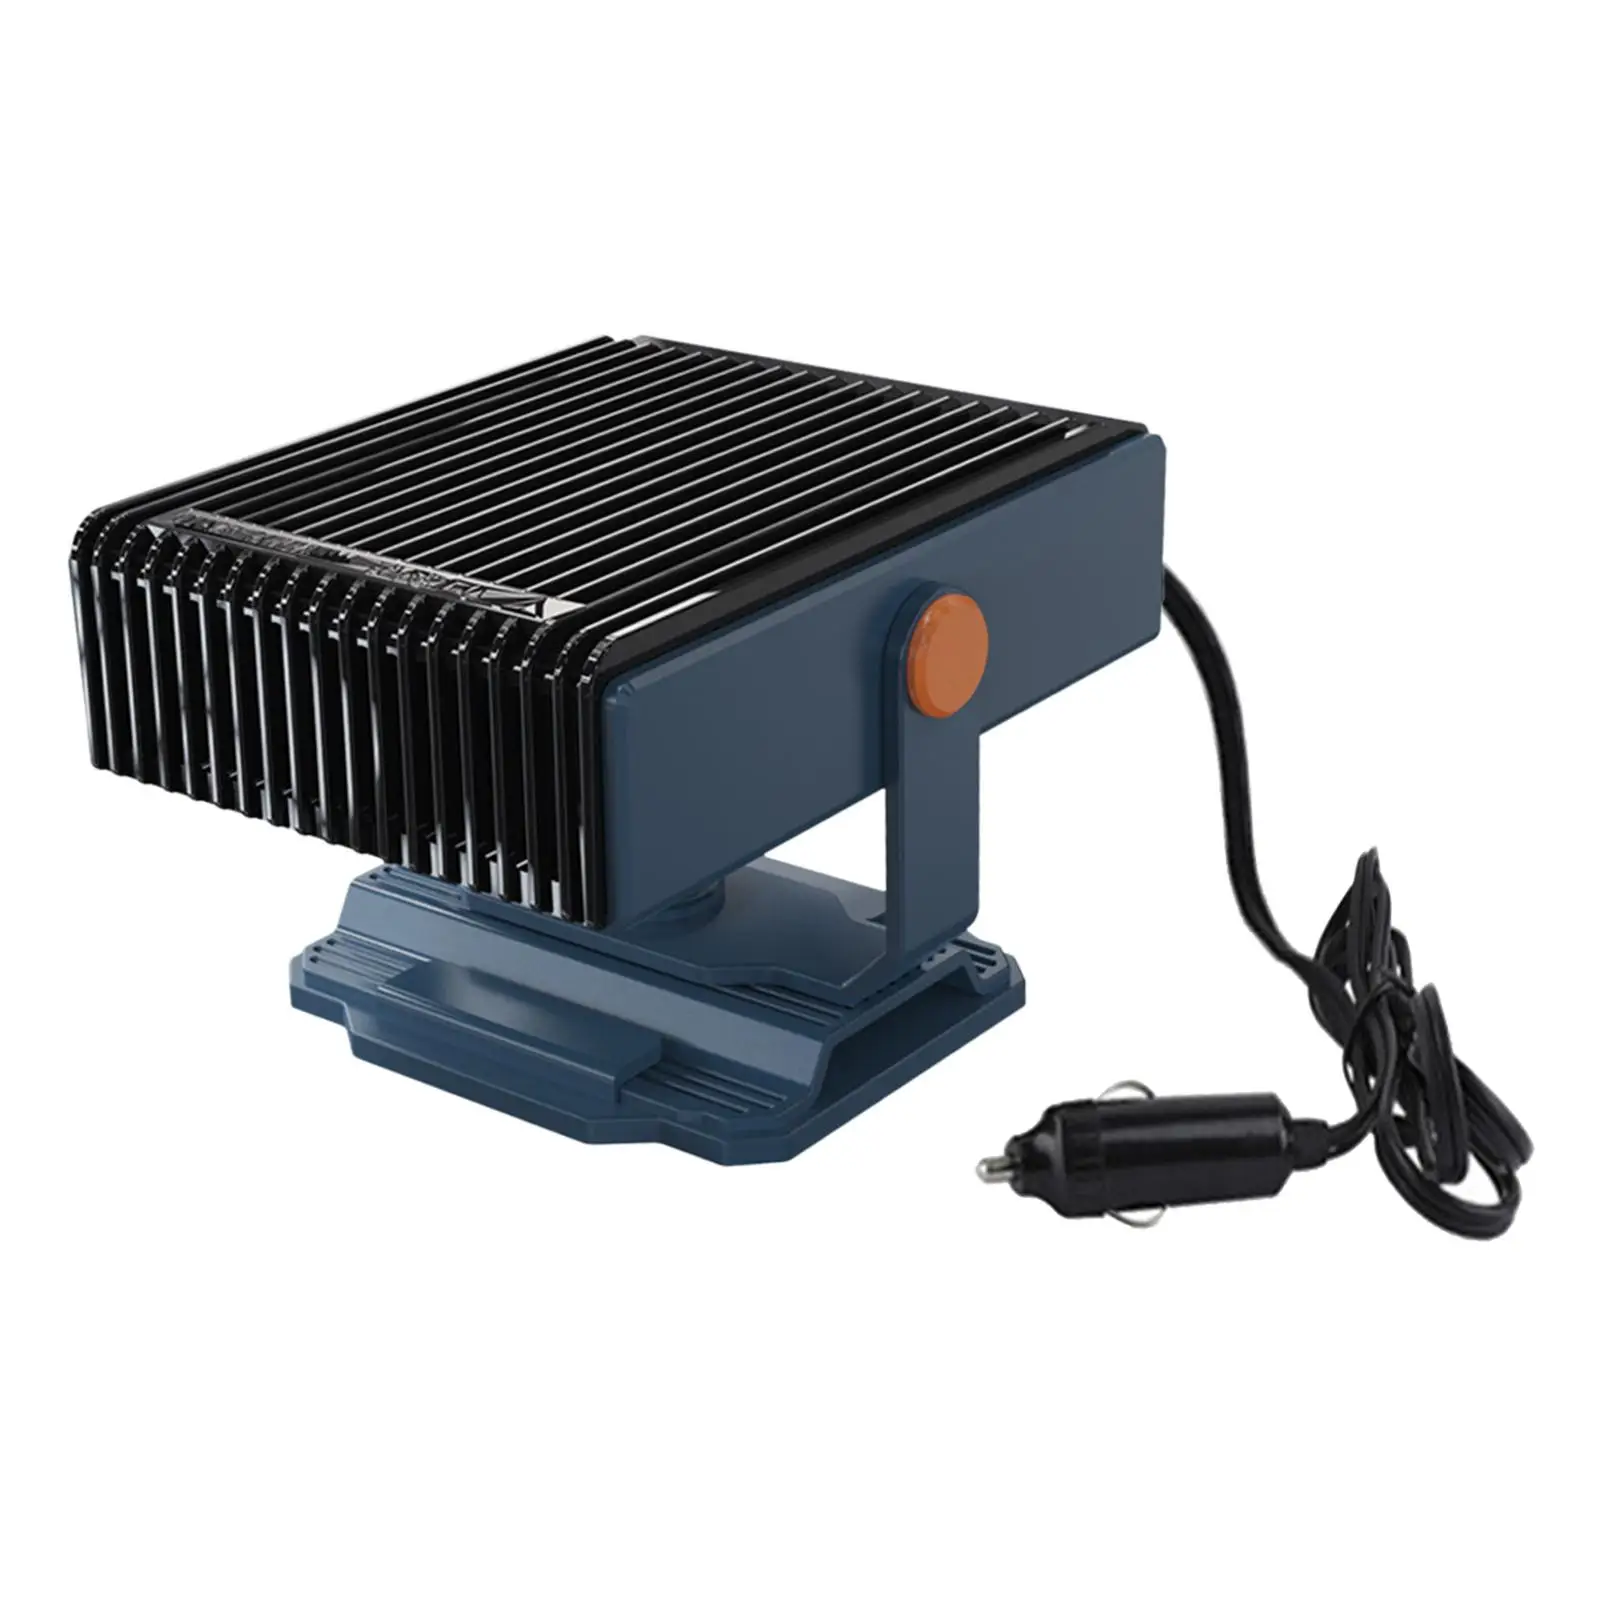 12V Car Heater Quick Heating Auto Heating Fan for Vehicles RV Truck